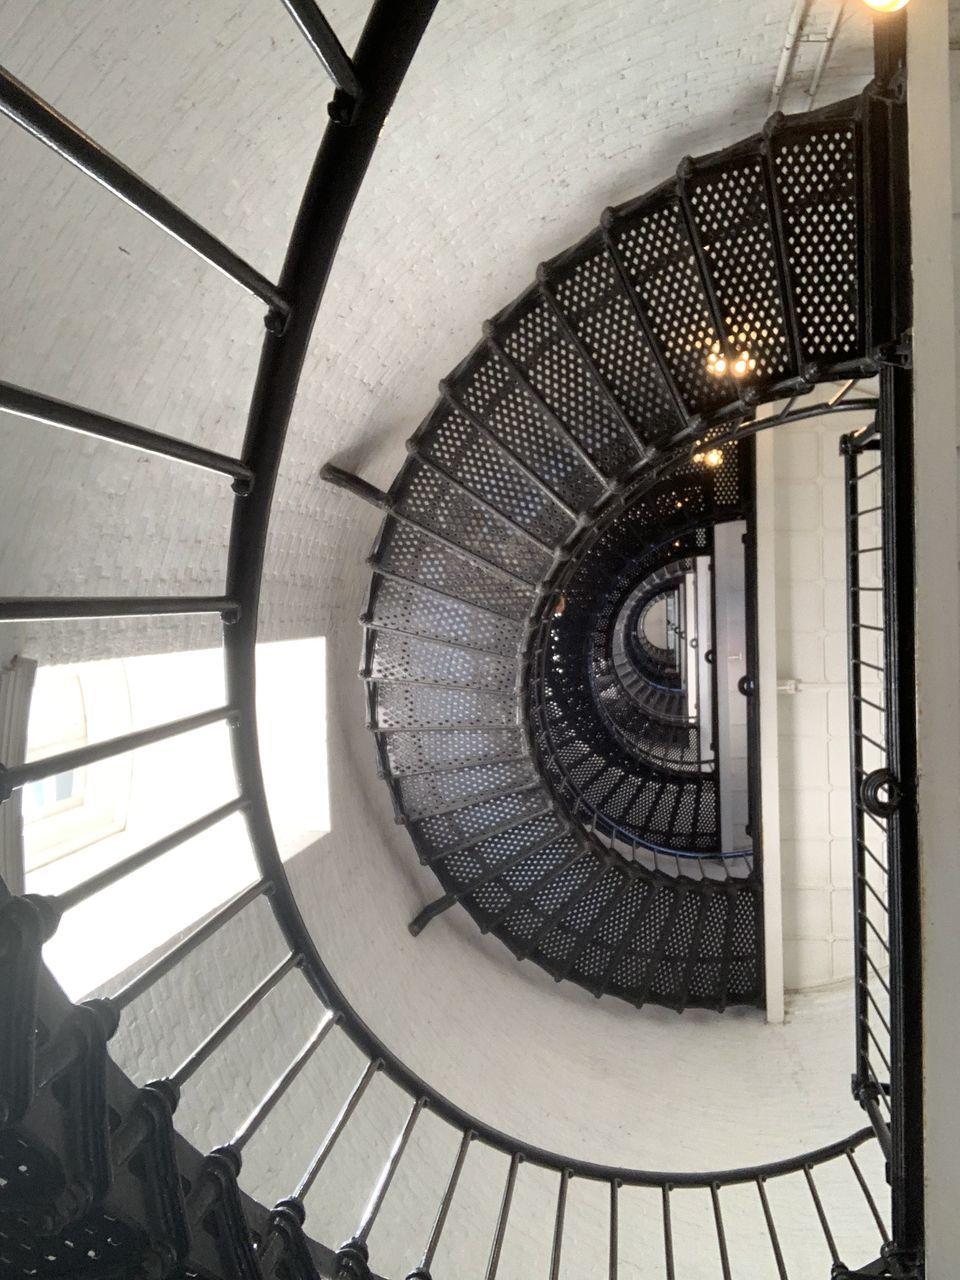 DIRECTLY ABOVE SHOT OF SPIRAL STAIRCASE IN BUILDING